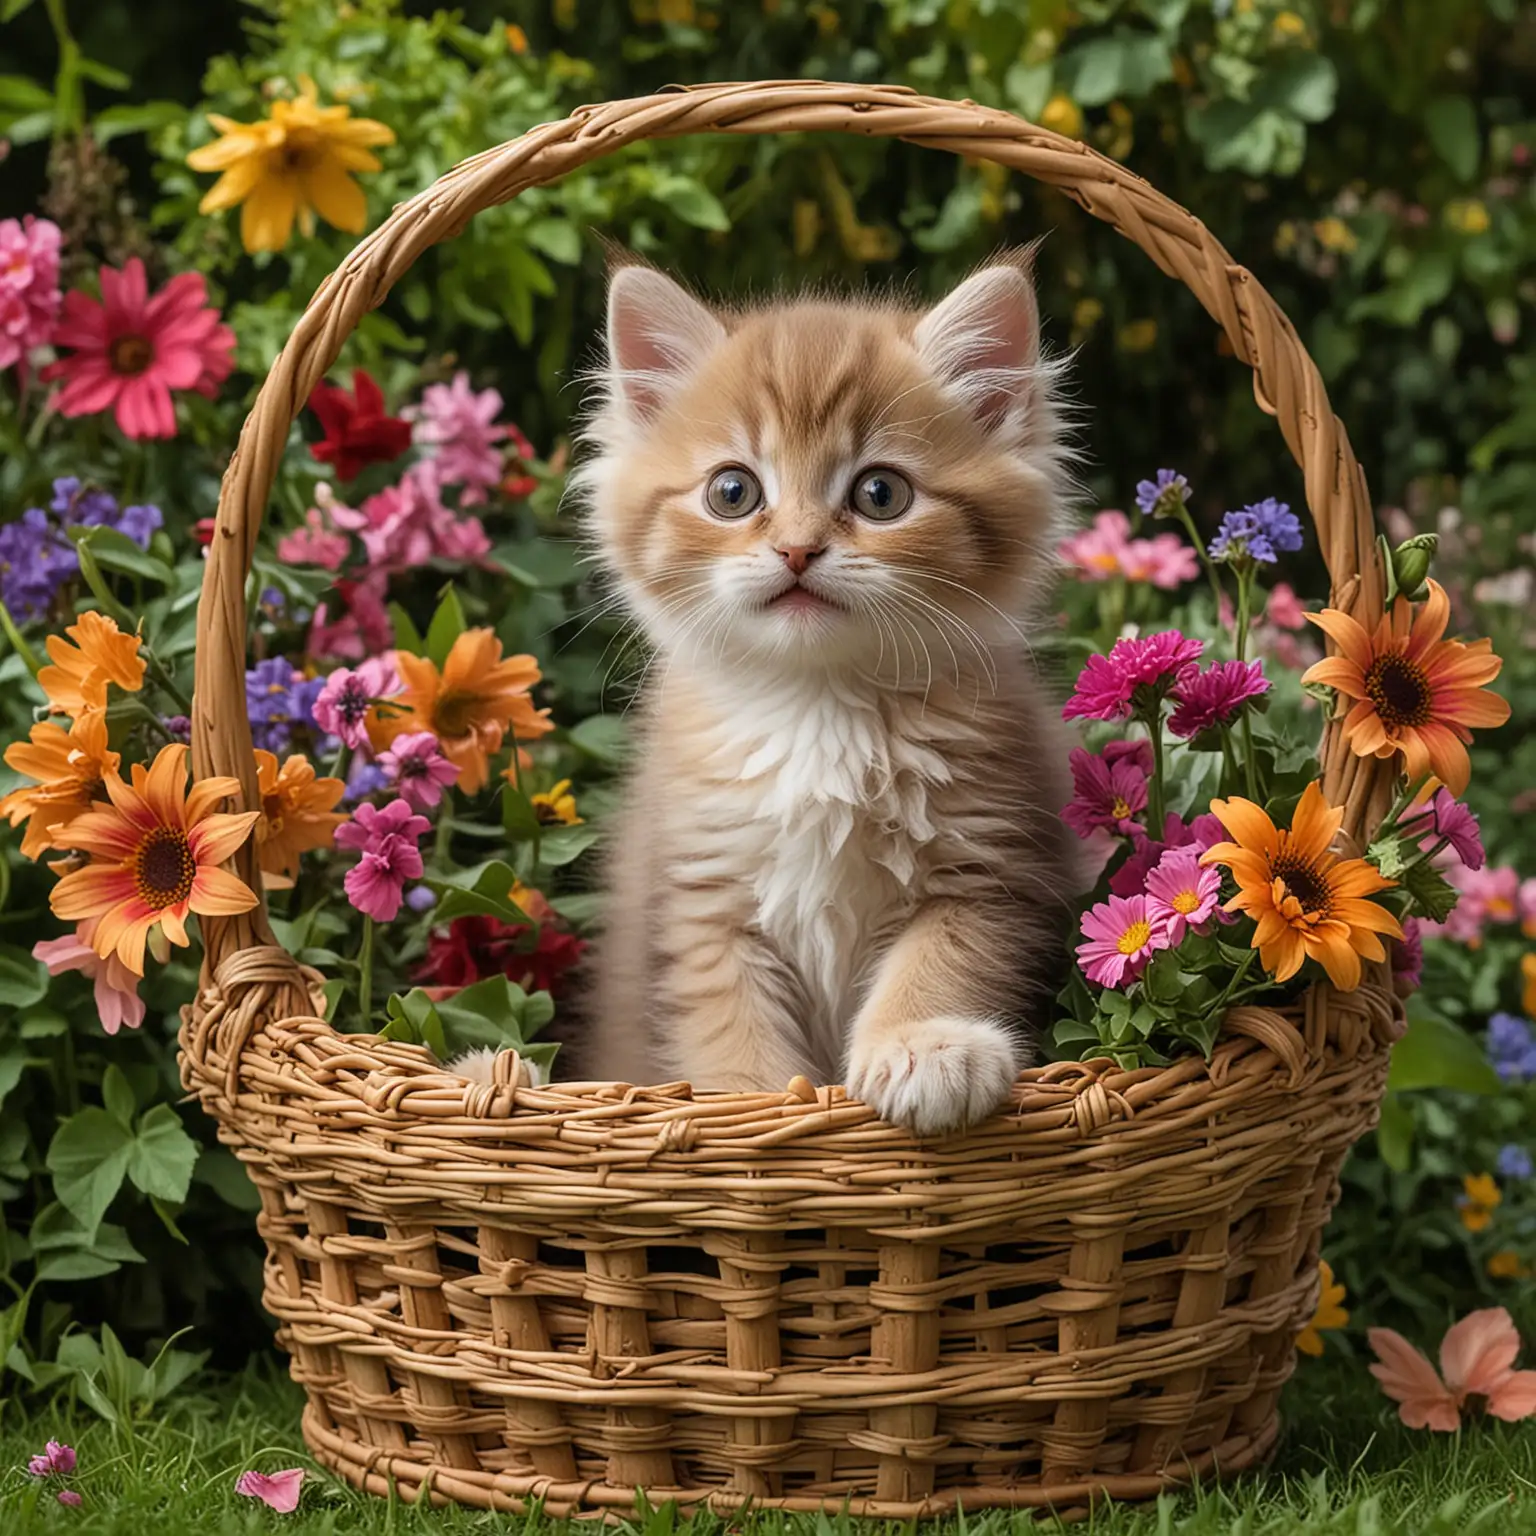 A fluffy, wide-eyed kitten tumbles playfully in a wicker basket overflowing with vibrant flowers, on a green garden  Its tiny paws bat at the petals, sending bursts of colorful blooms into the air, while its tail swishes with curiosity, The kitten's mischievous antics and innocent gaze make for a heartwarming and whimsical scene.